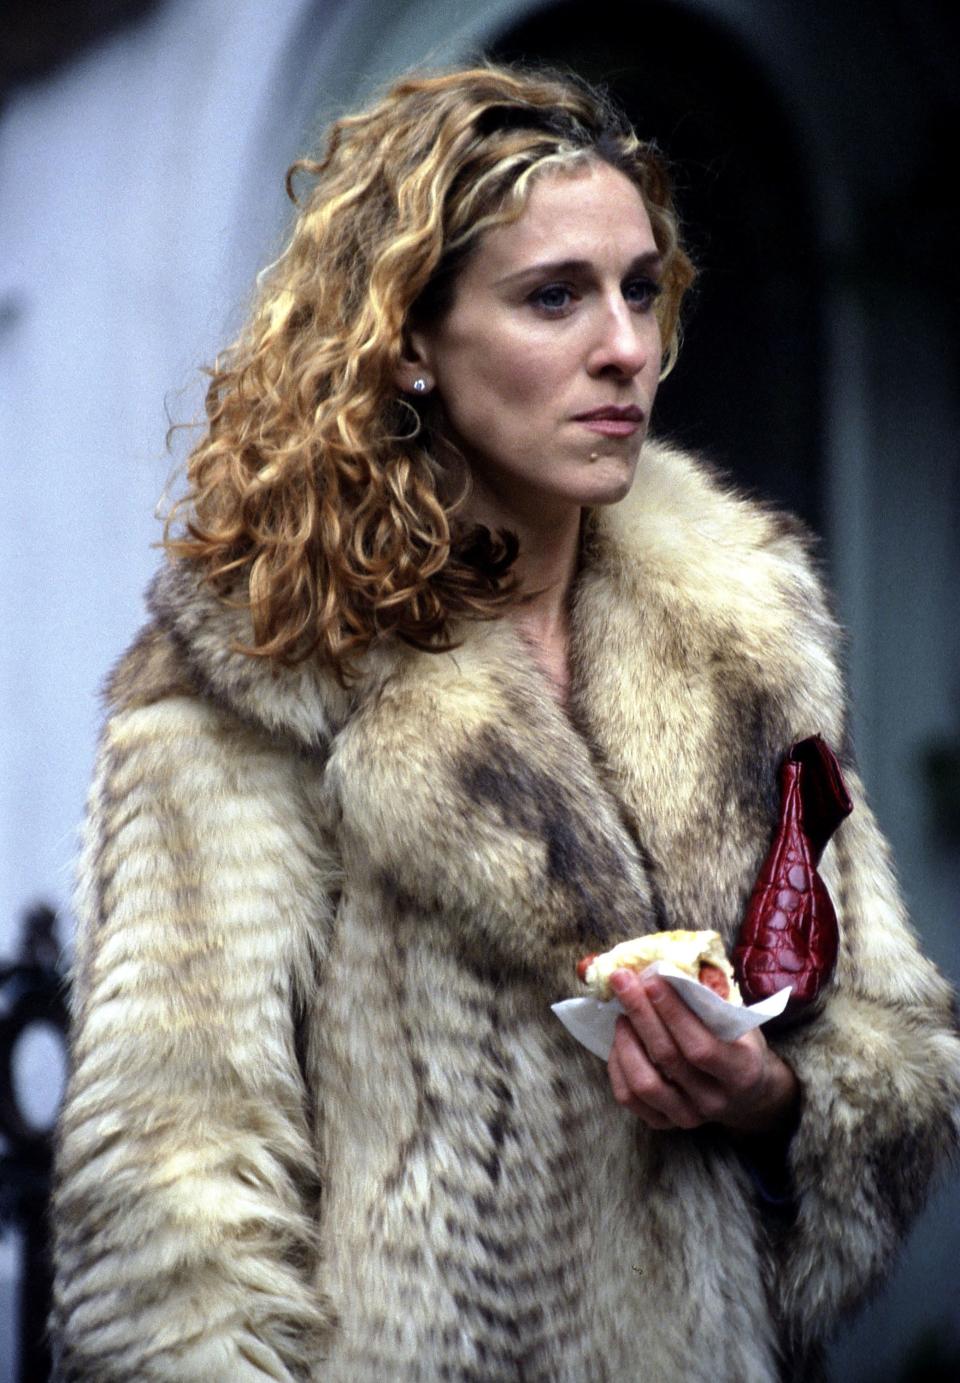 Sarah Jessica Parker on the set of Sex and the City